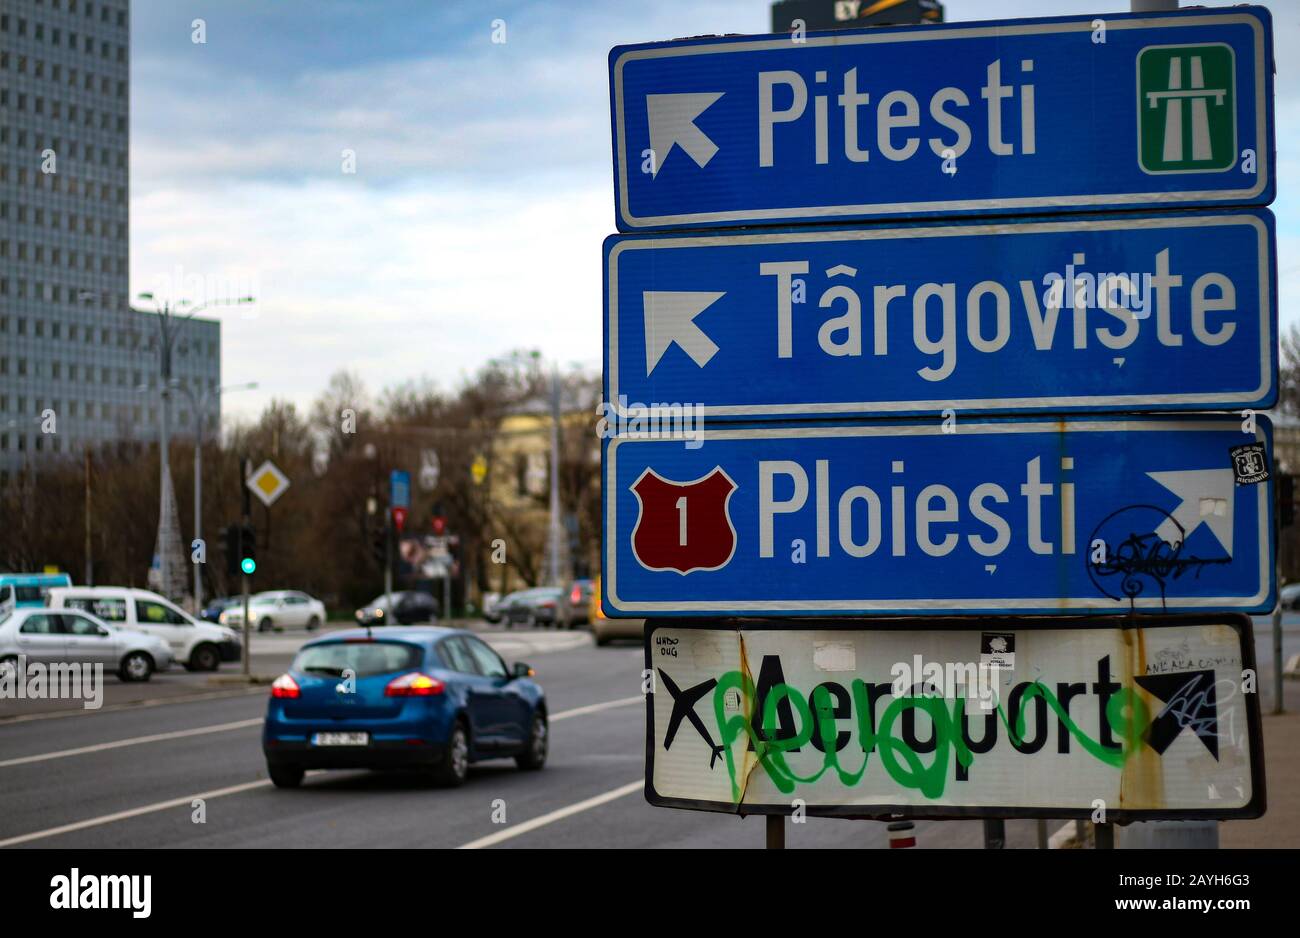 Bucharest, Romania - January 06, 2020: Direction indicator road signs for the main cities can be seen in Victoriei Square, Bucharest. Stock Photo